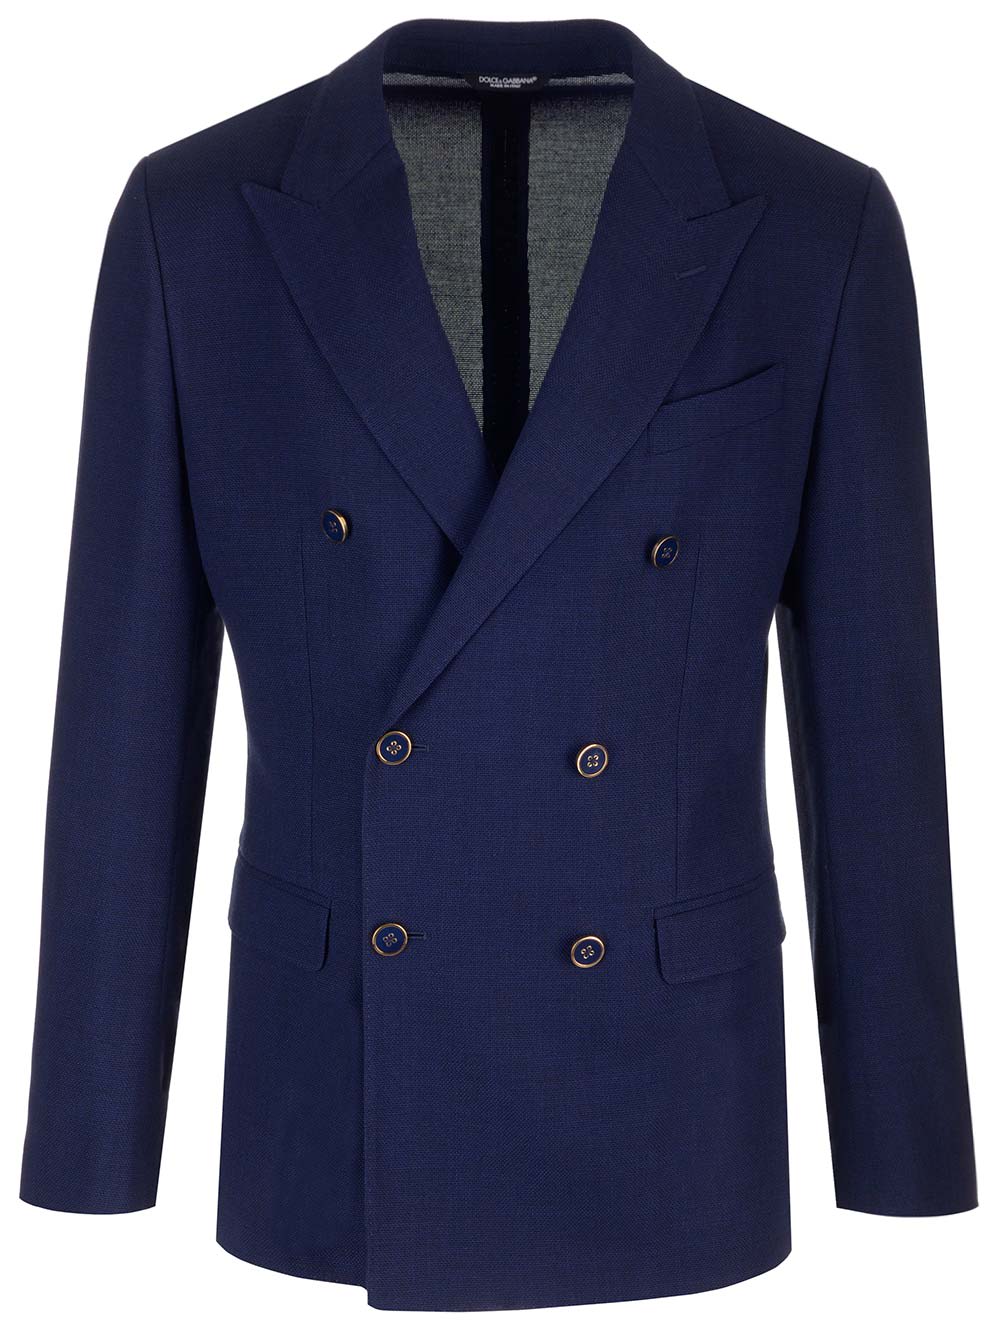 DOLCE & GABBANA DOUBLE-BREASTED WOOL TAILORED JACKET